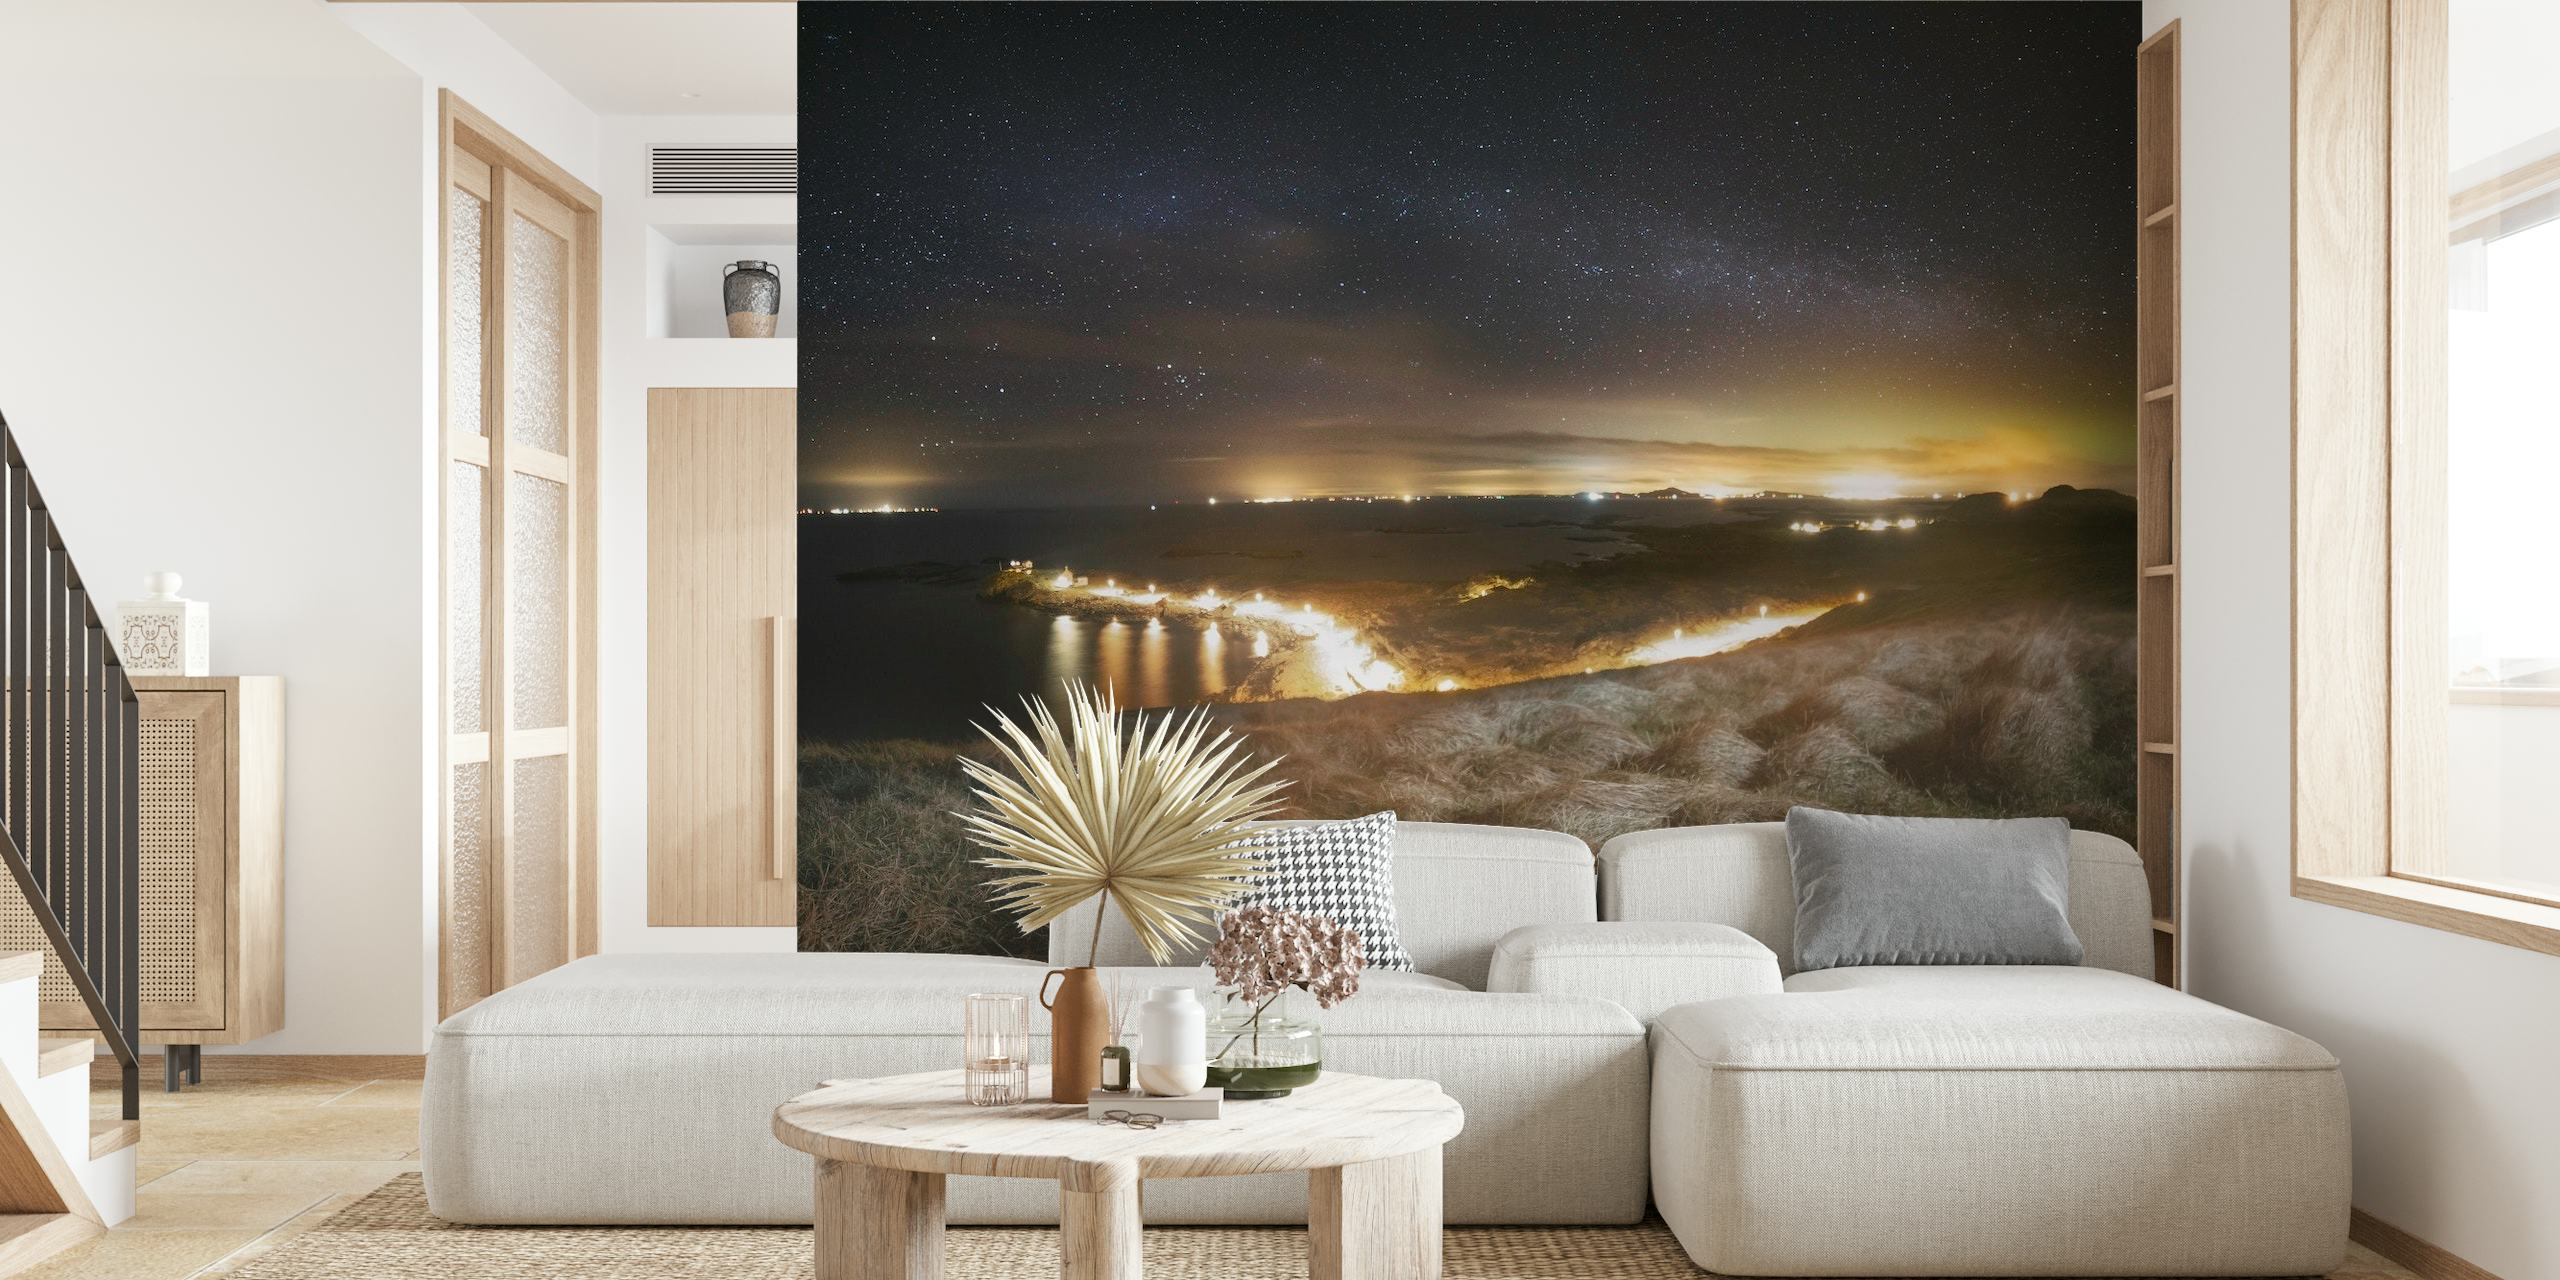 Nighttime landscape featuring twinkling stars over a tranquil town